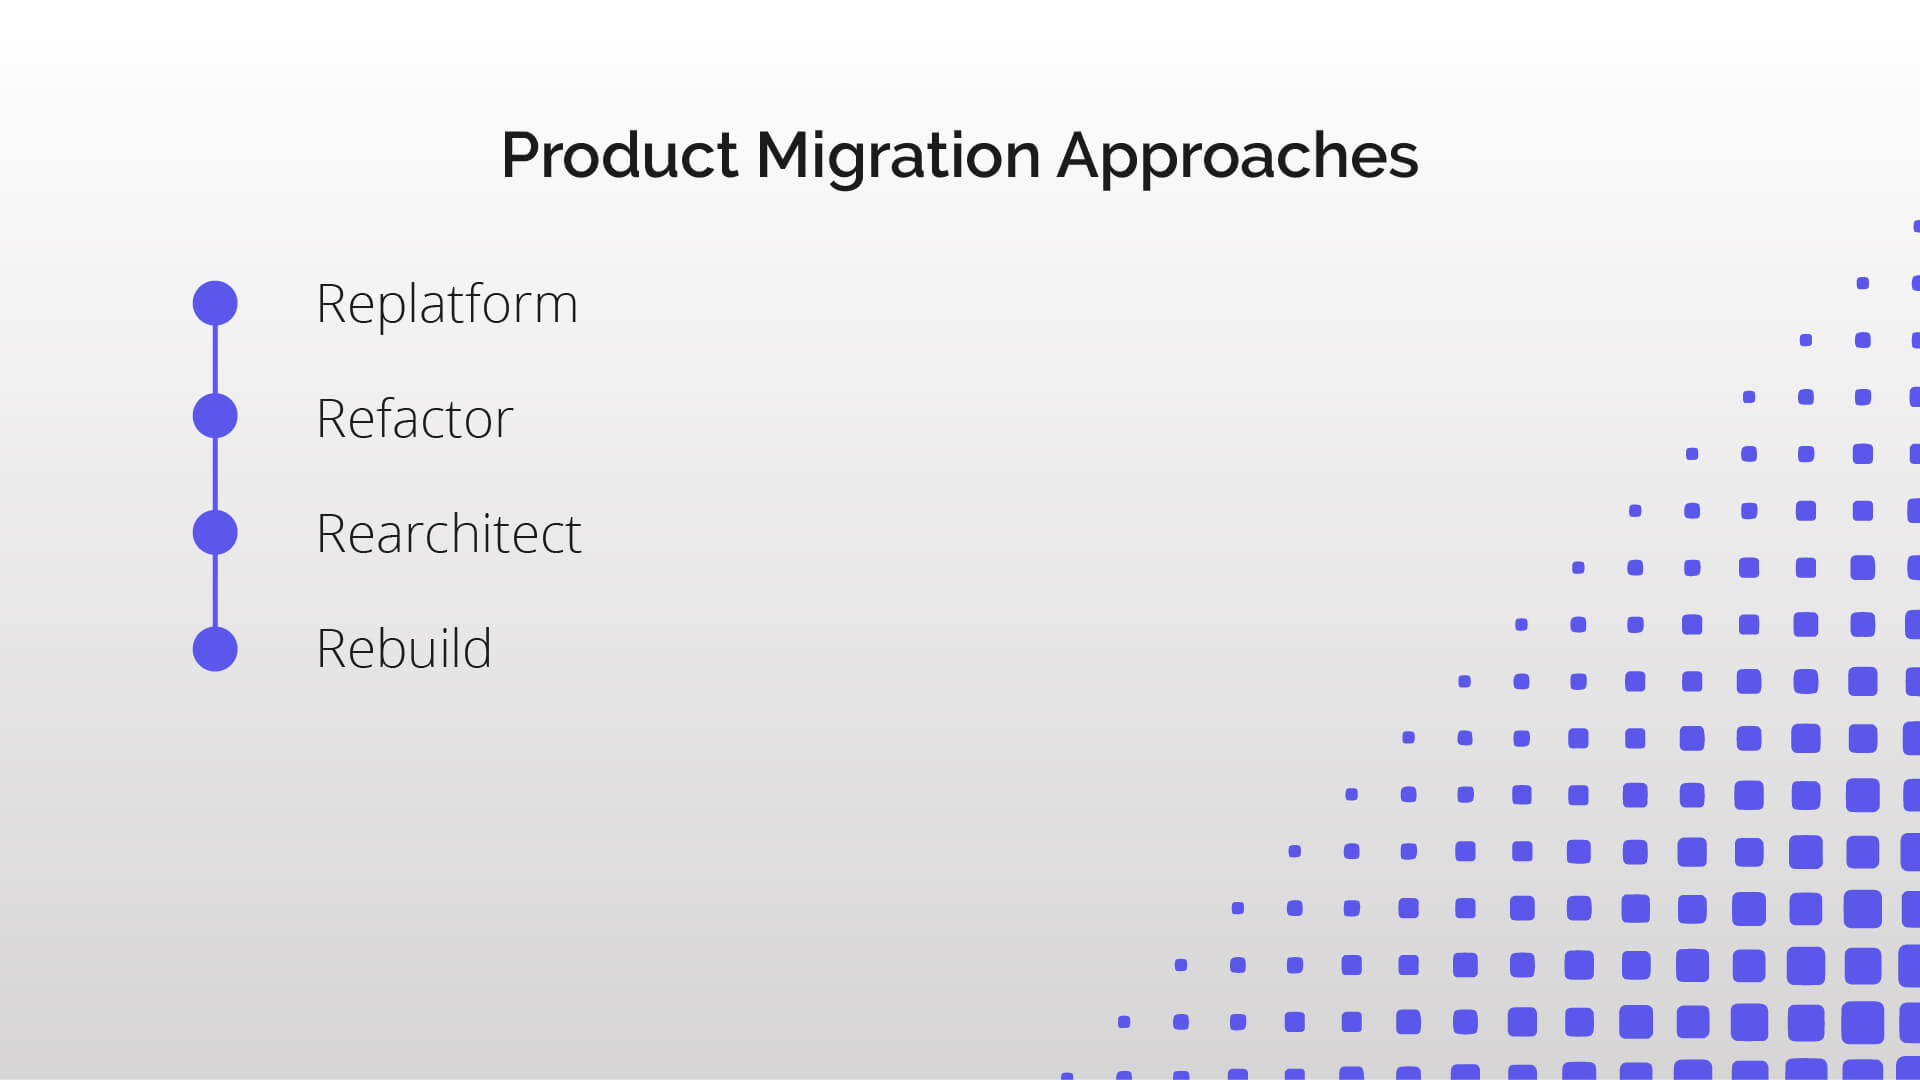 DNN_Migration_Product Migration Approaches.jpg